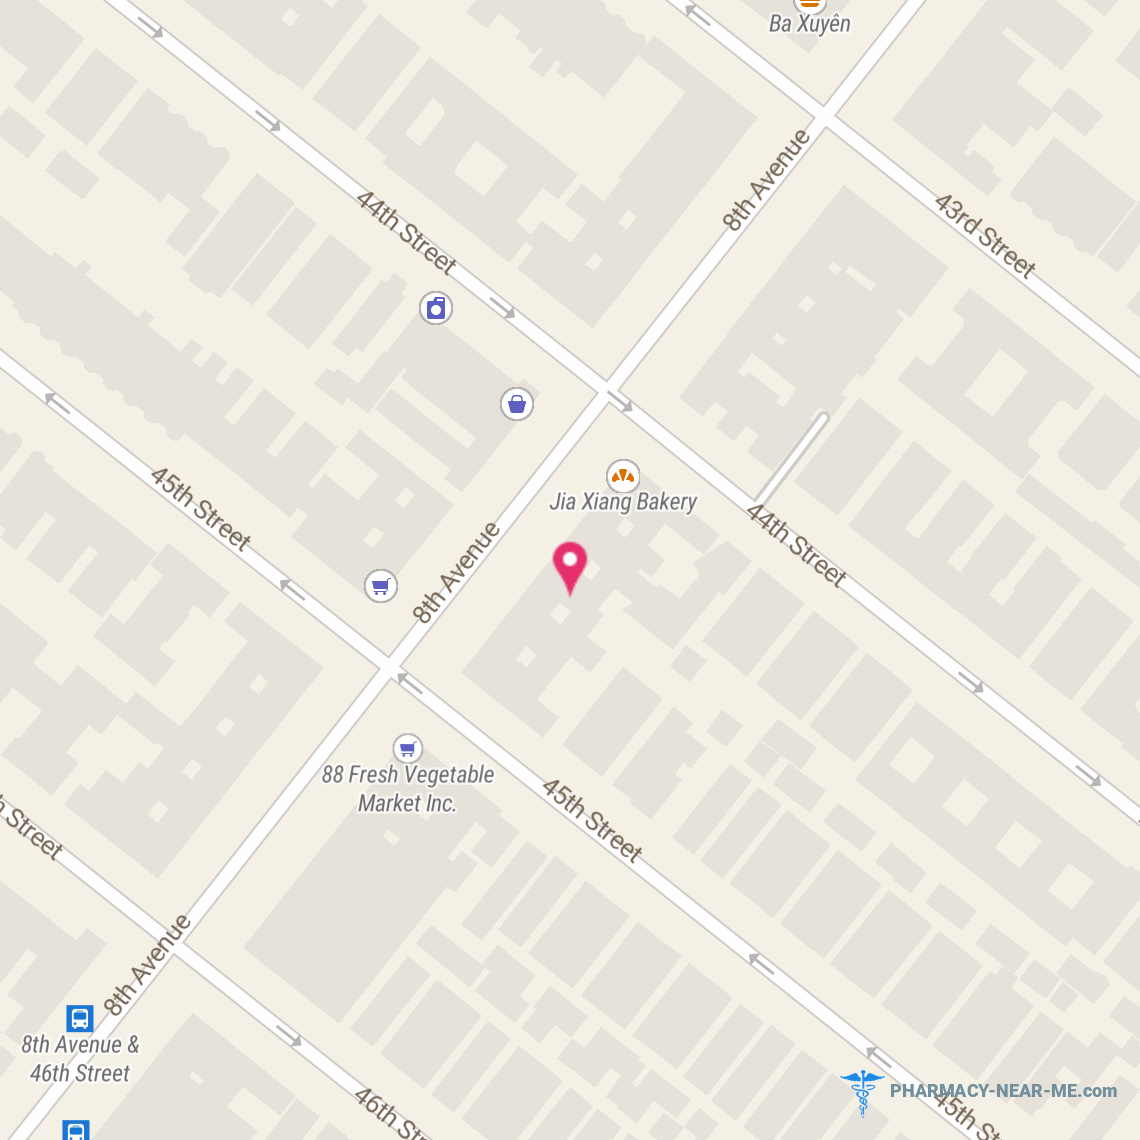 BROTHER RX INC. - Pharmacy Hours, Phone, Reviews & Information: 4411 8th Avenue, Brooklyn, New York 11220, United States